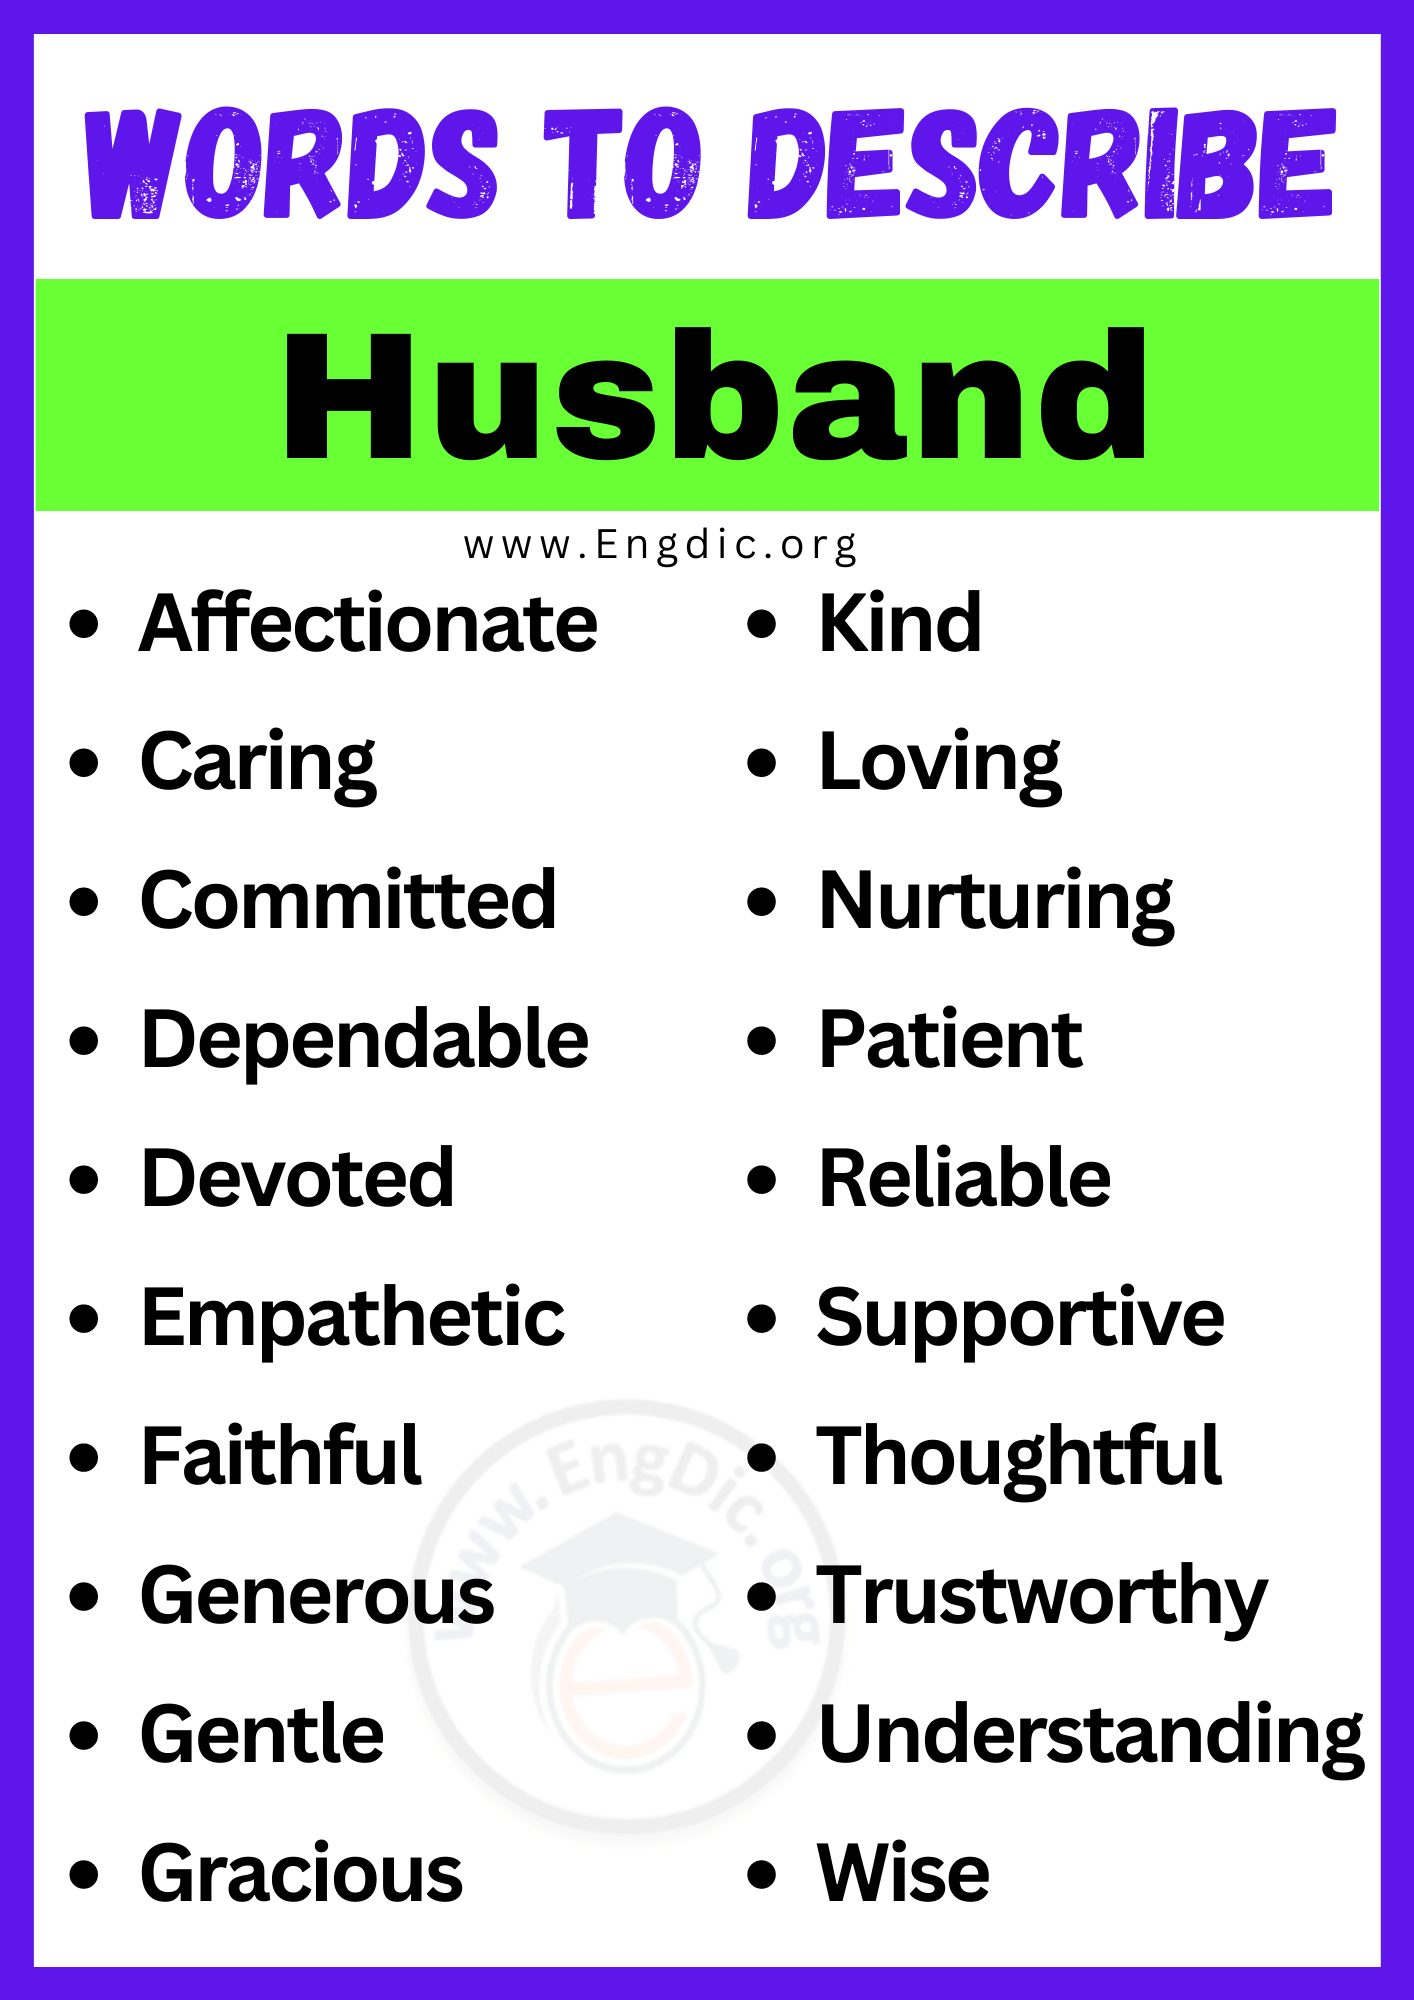 Words to Describe Husband